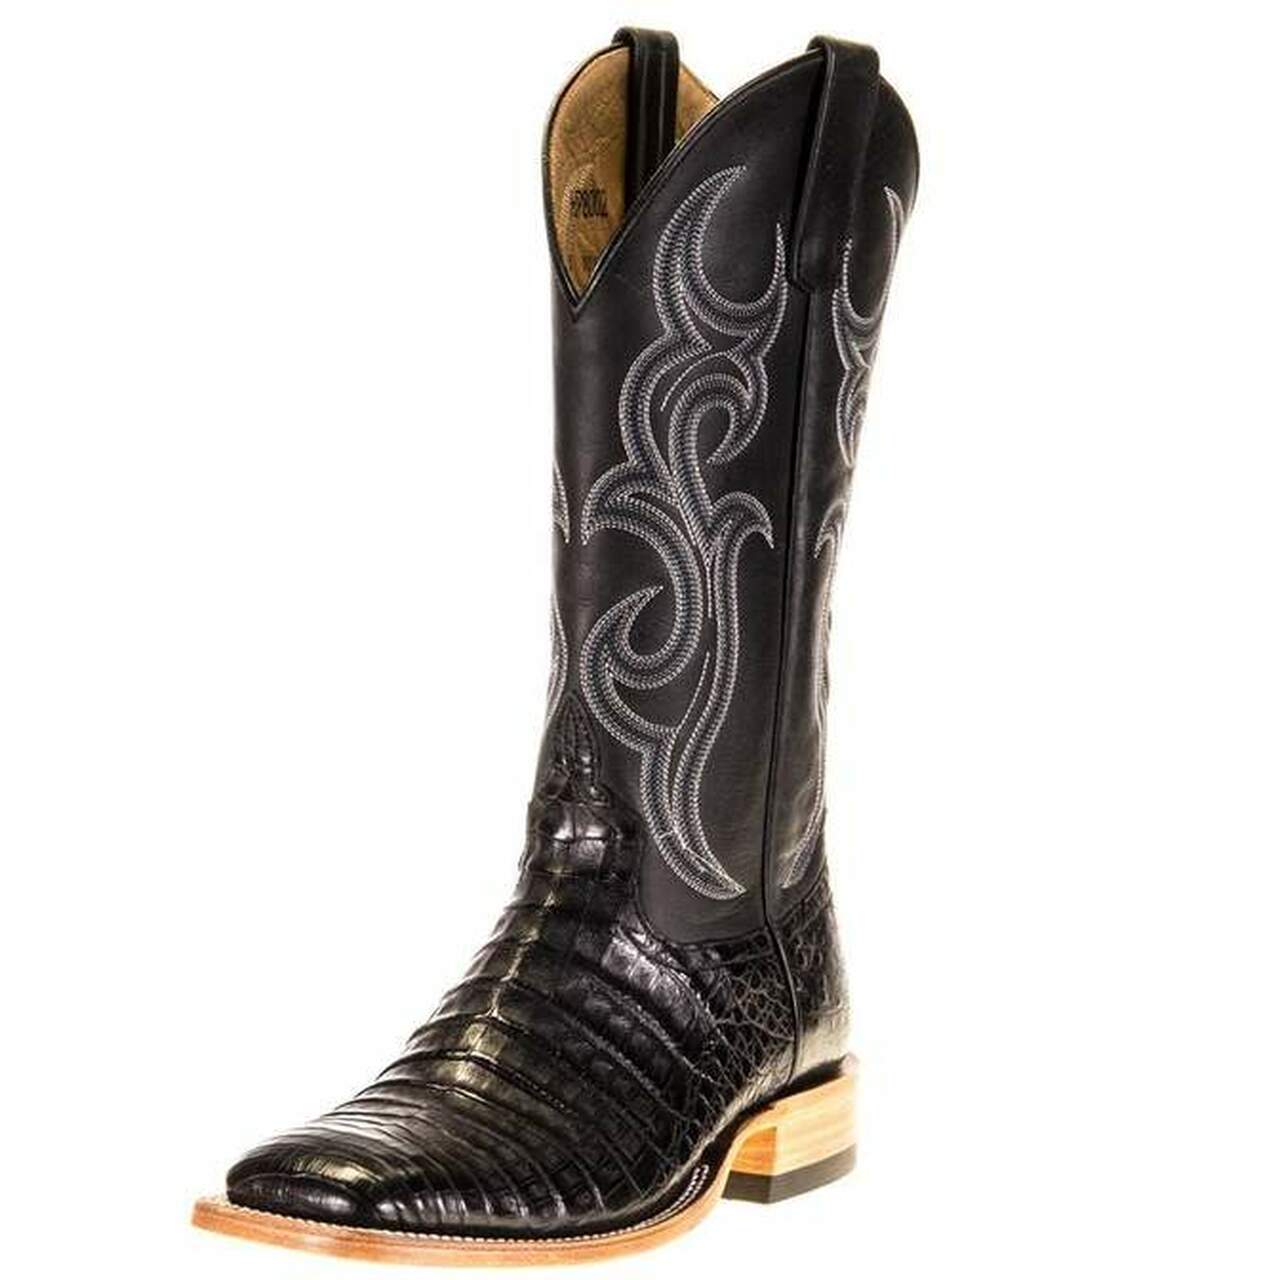 MEN'S HORSE POWER BY ANDERSON BEAN WESTERN EXOTIC BOOTS HP8002 CAIMAN